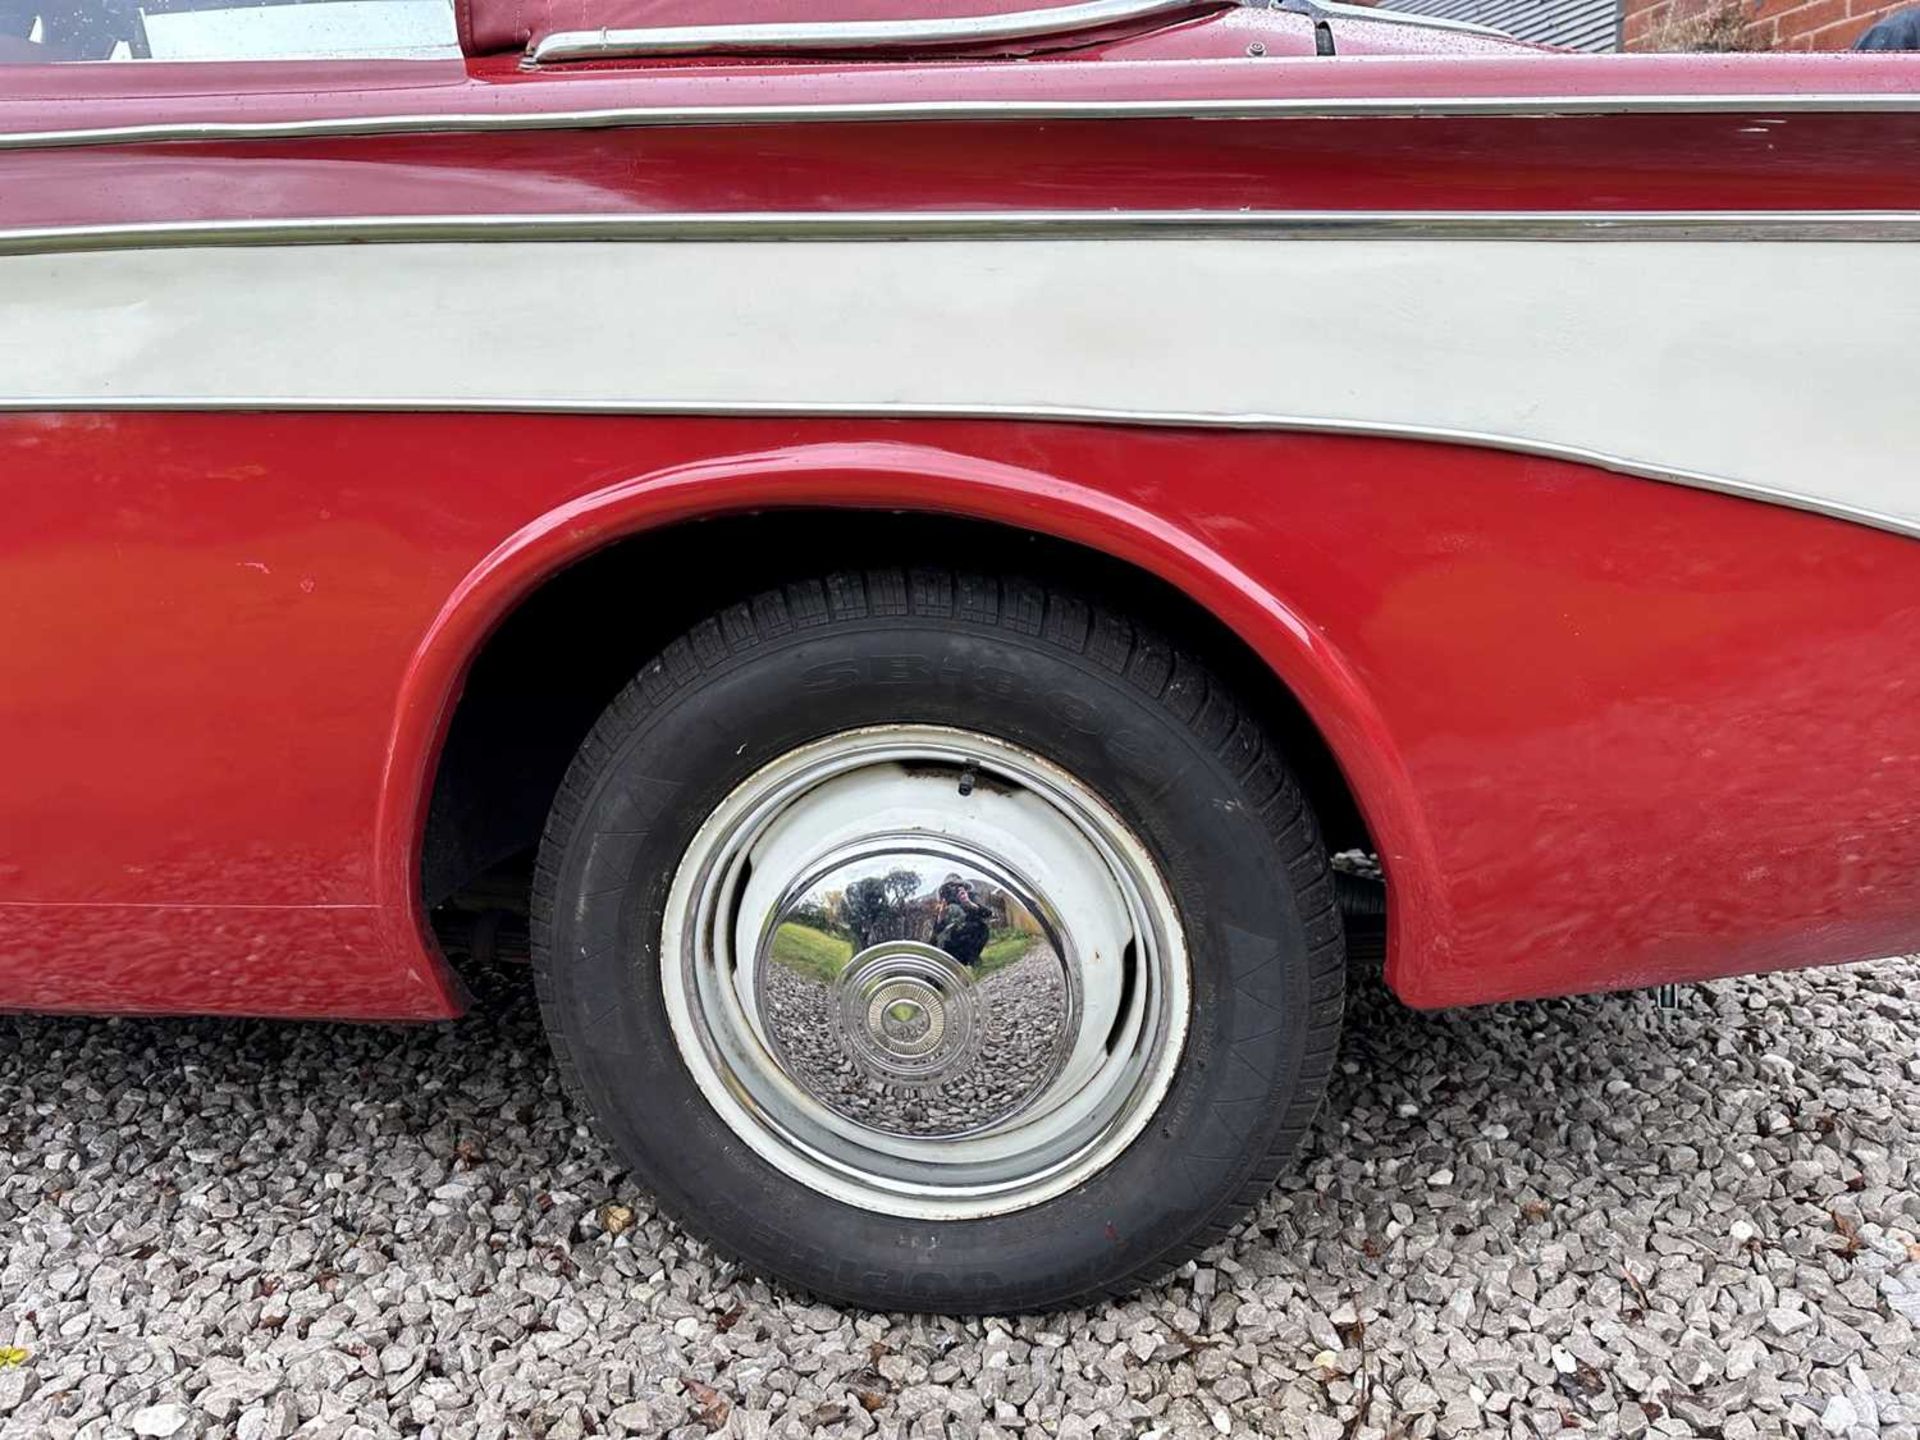 1961 Singer Gazelle Convertible Comes complete with overdrive, period radio and badge bar - Image 69 of 95